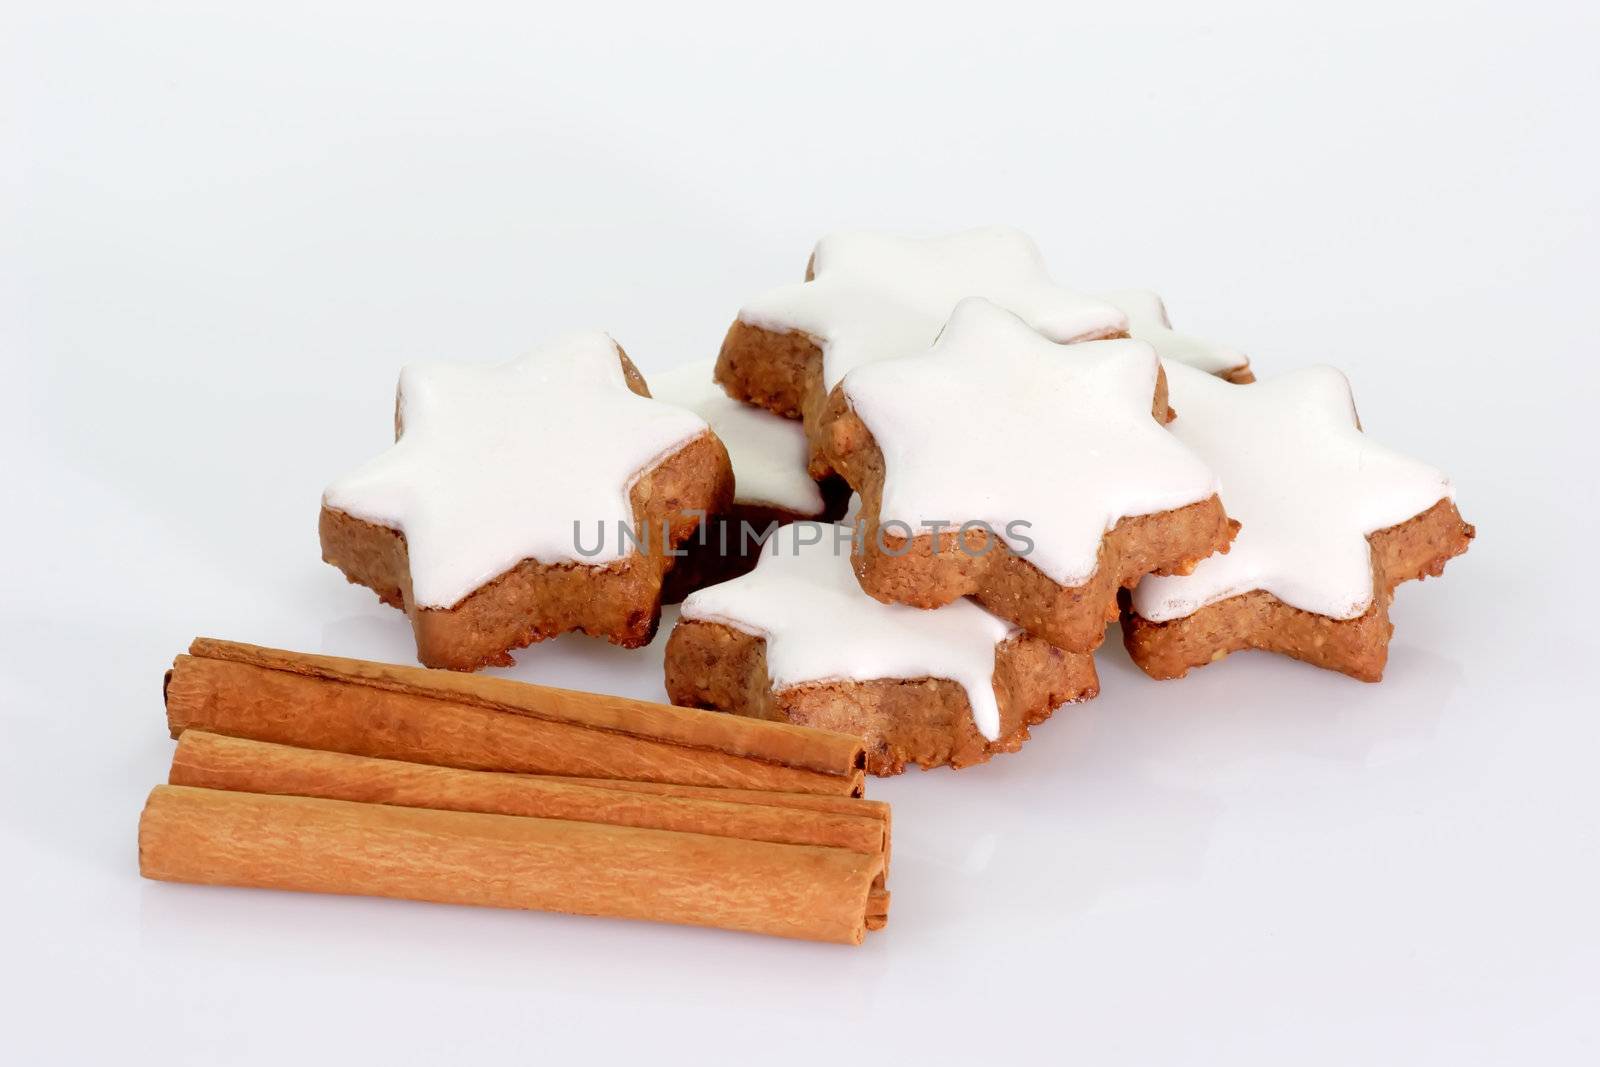 Christmas cookies with cinnamon sticks on bright background